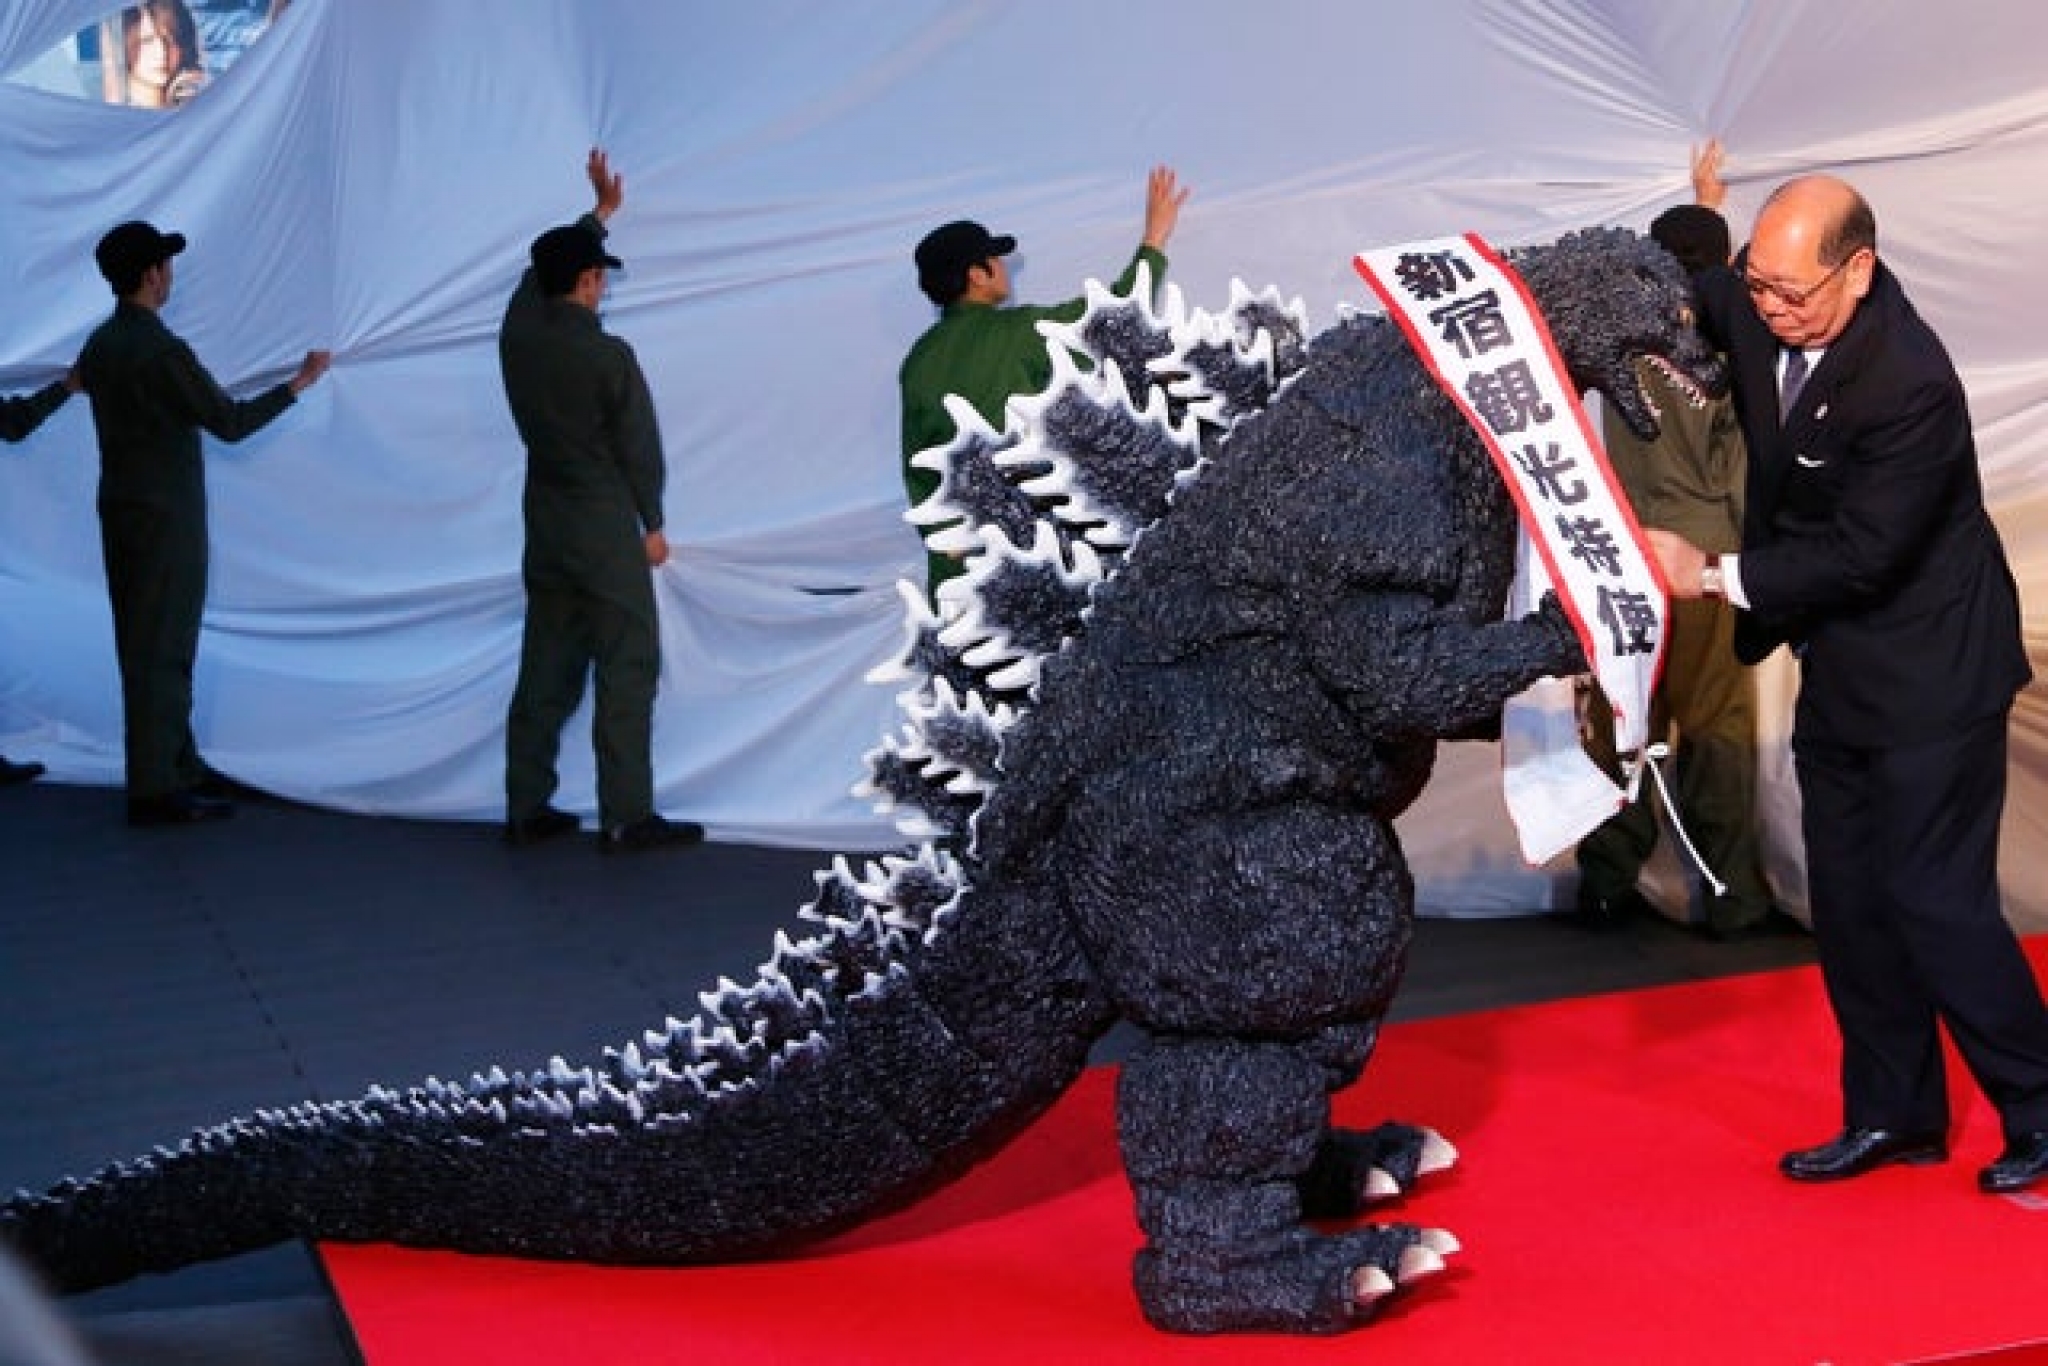 In 2015, Godzilla became an official Japanese citizen and was also employed as a tourism ambassador of japan.